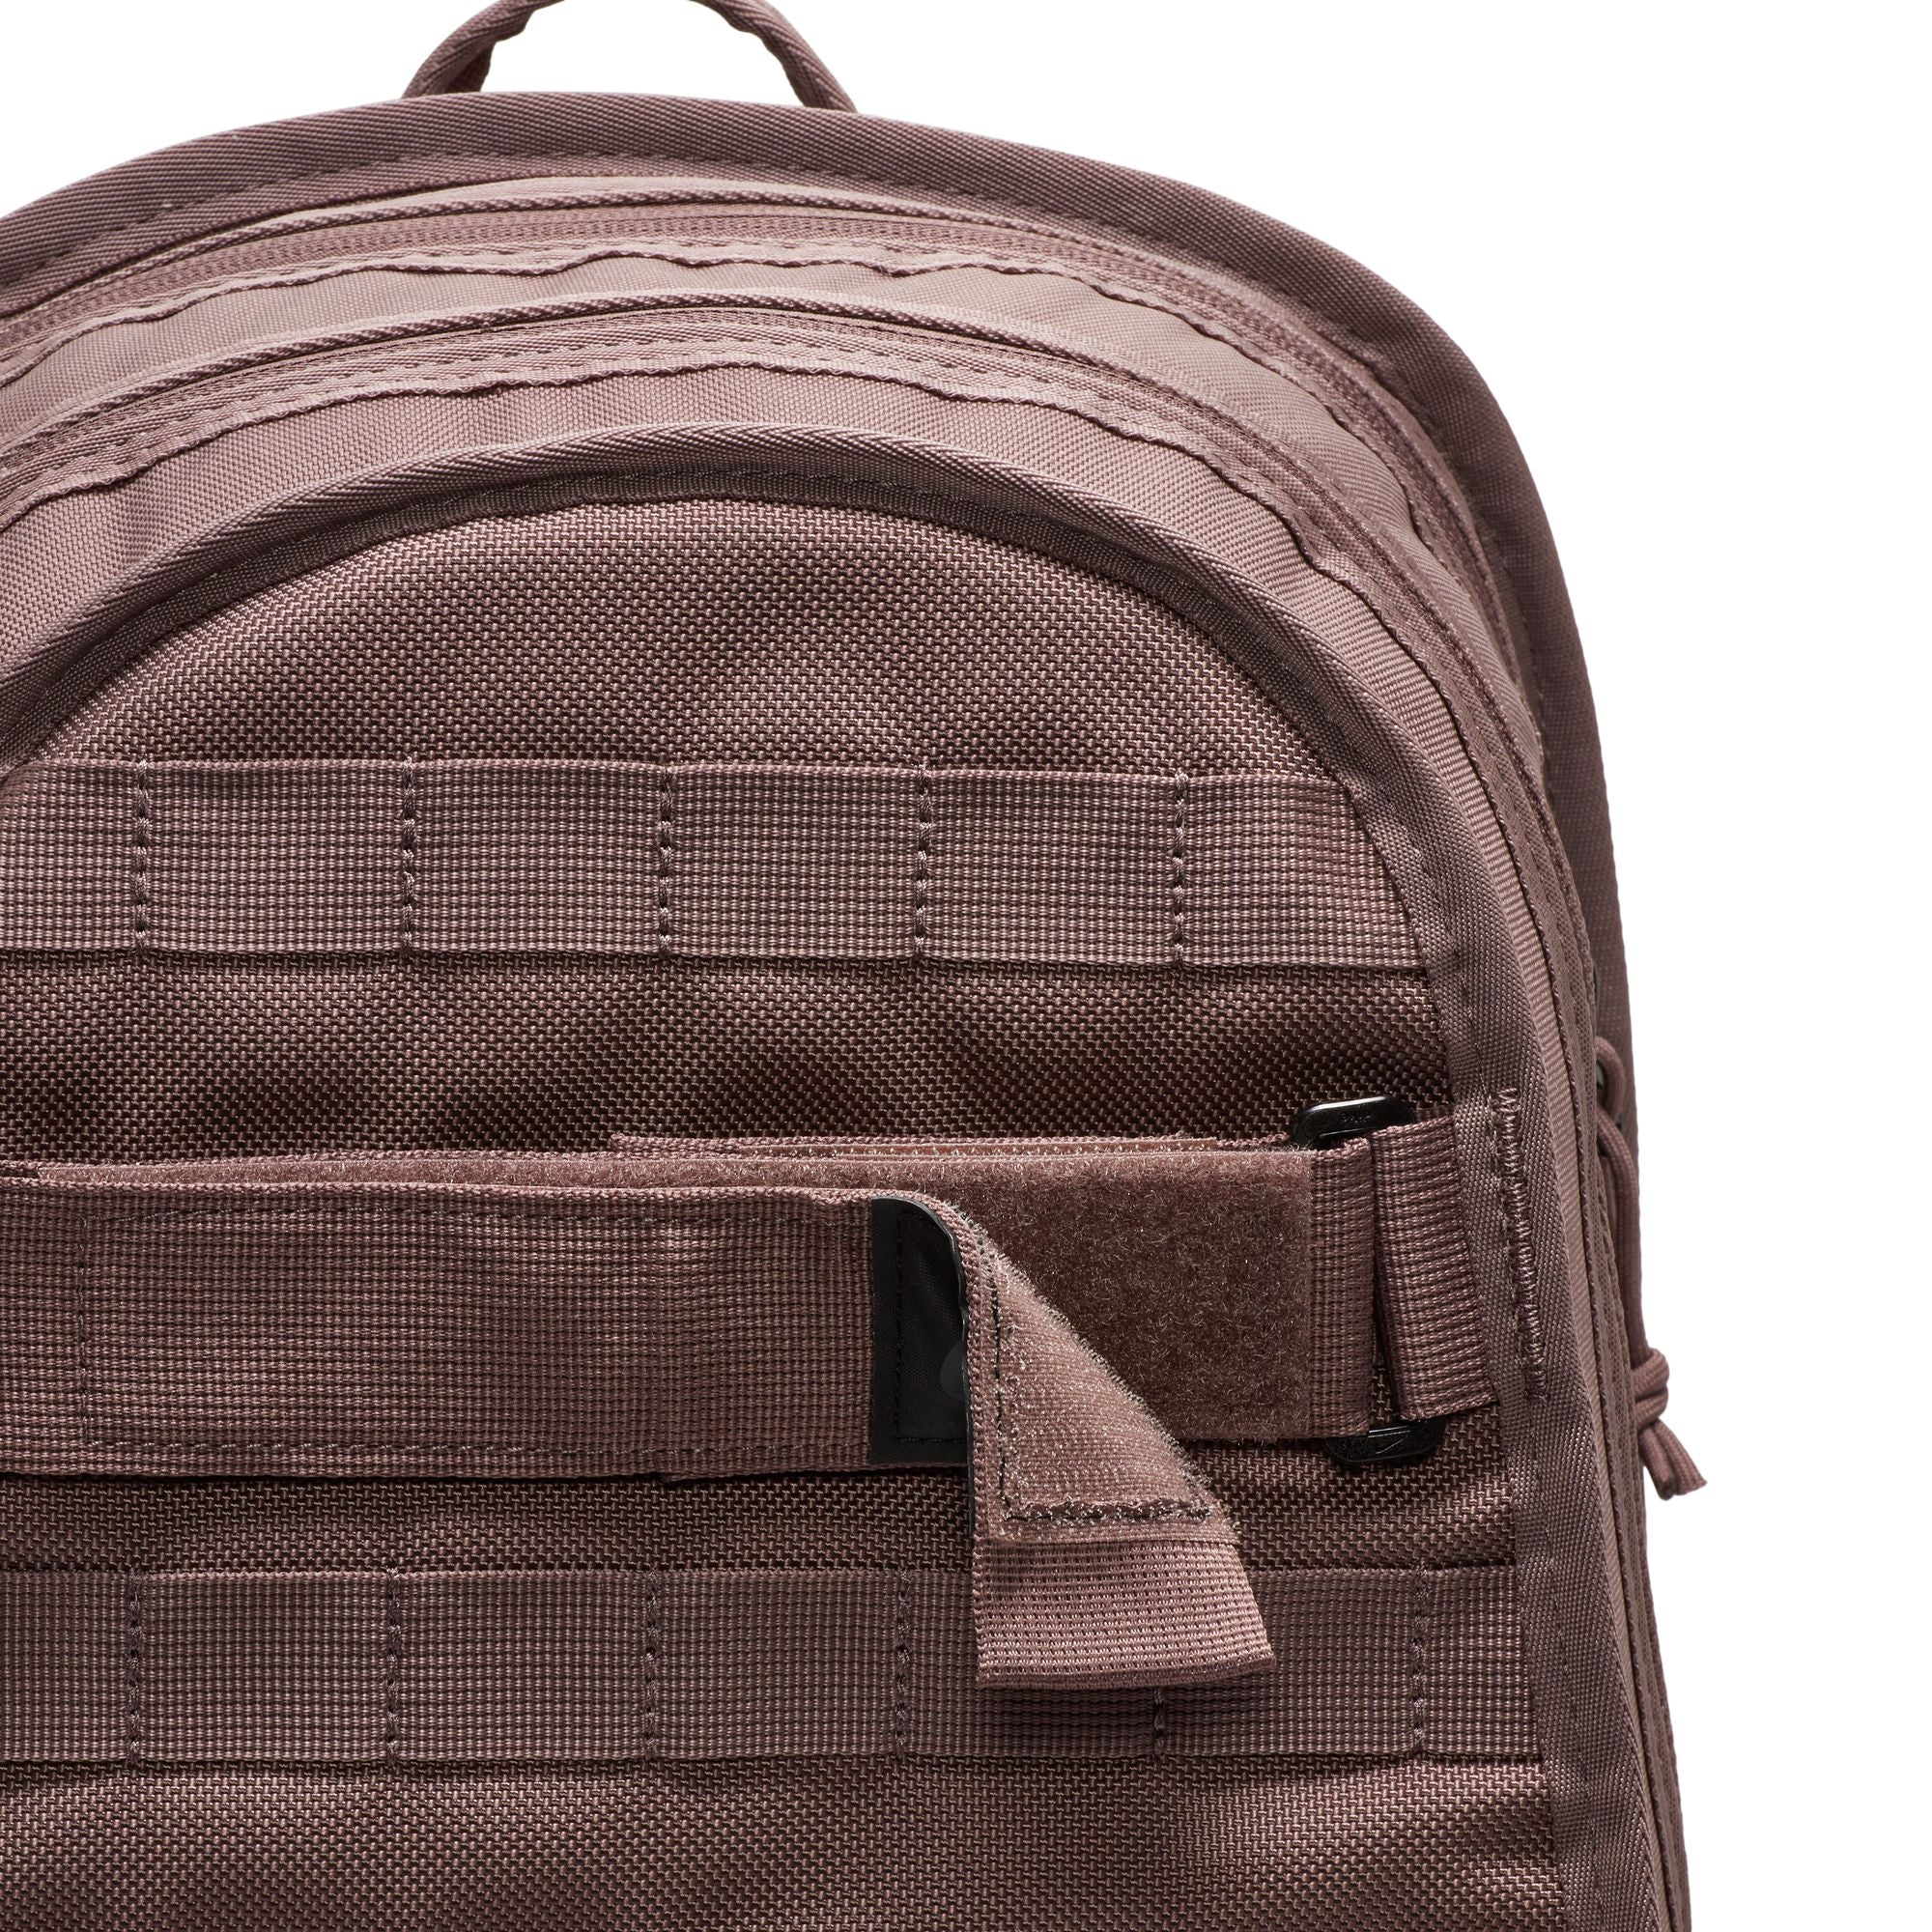 RPM BACKPACK PLUM ECLIPSE